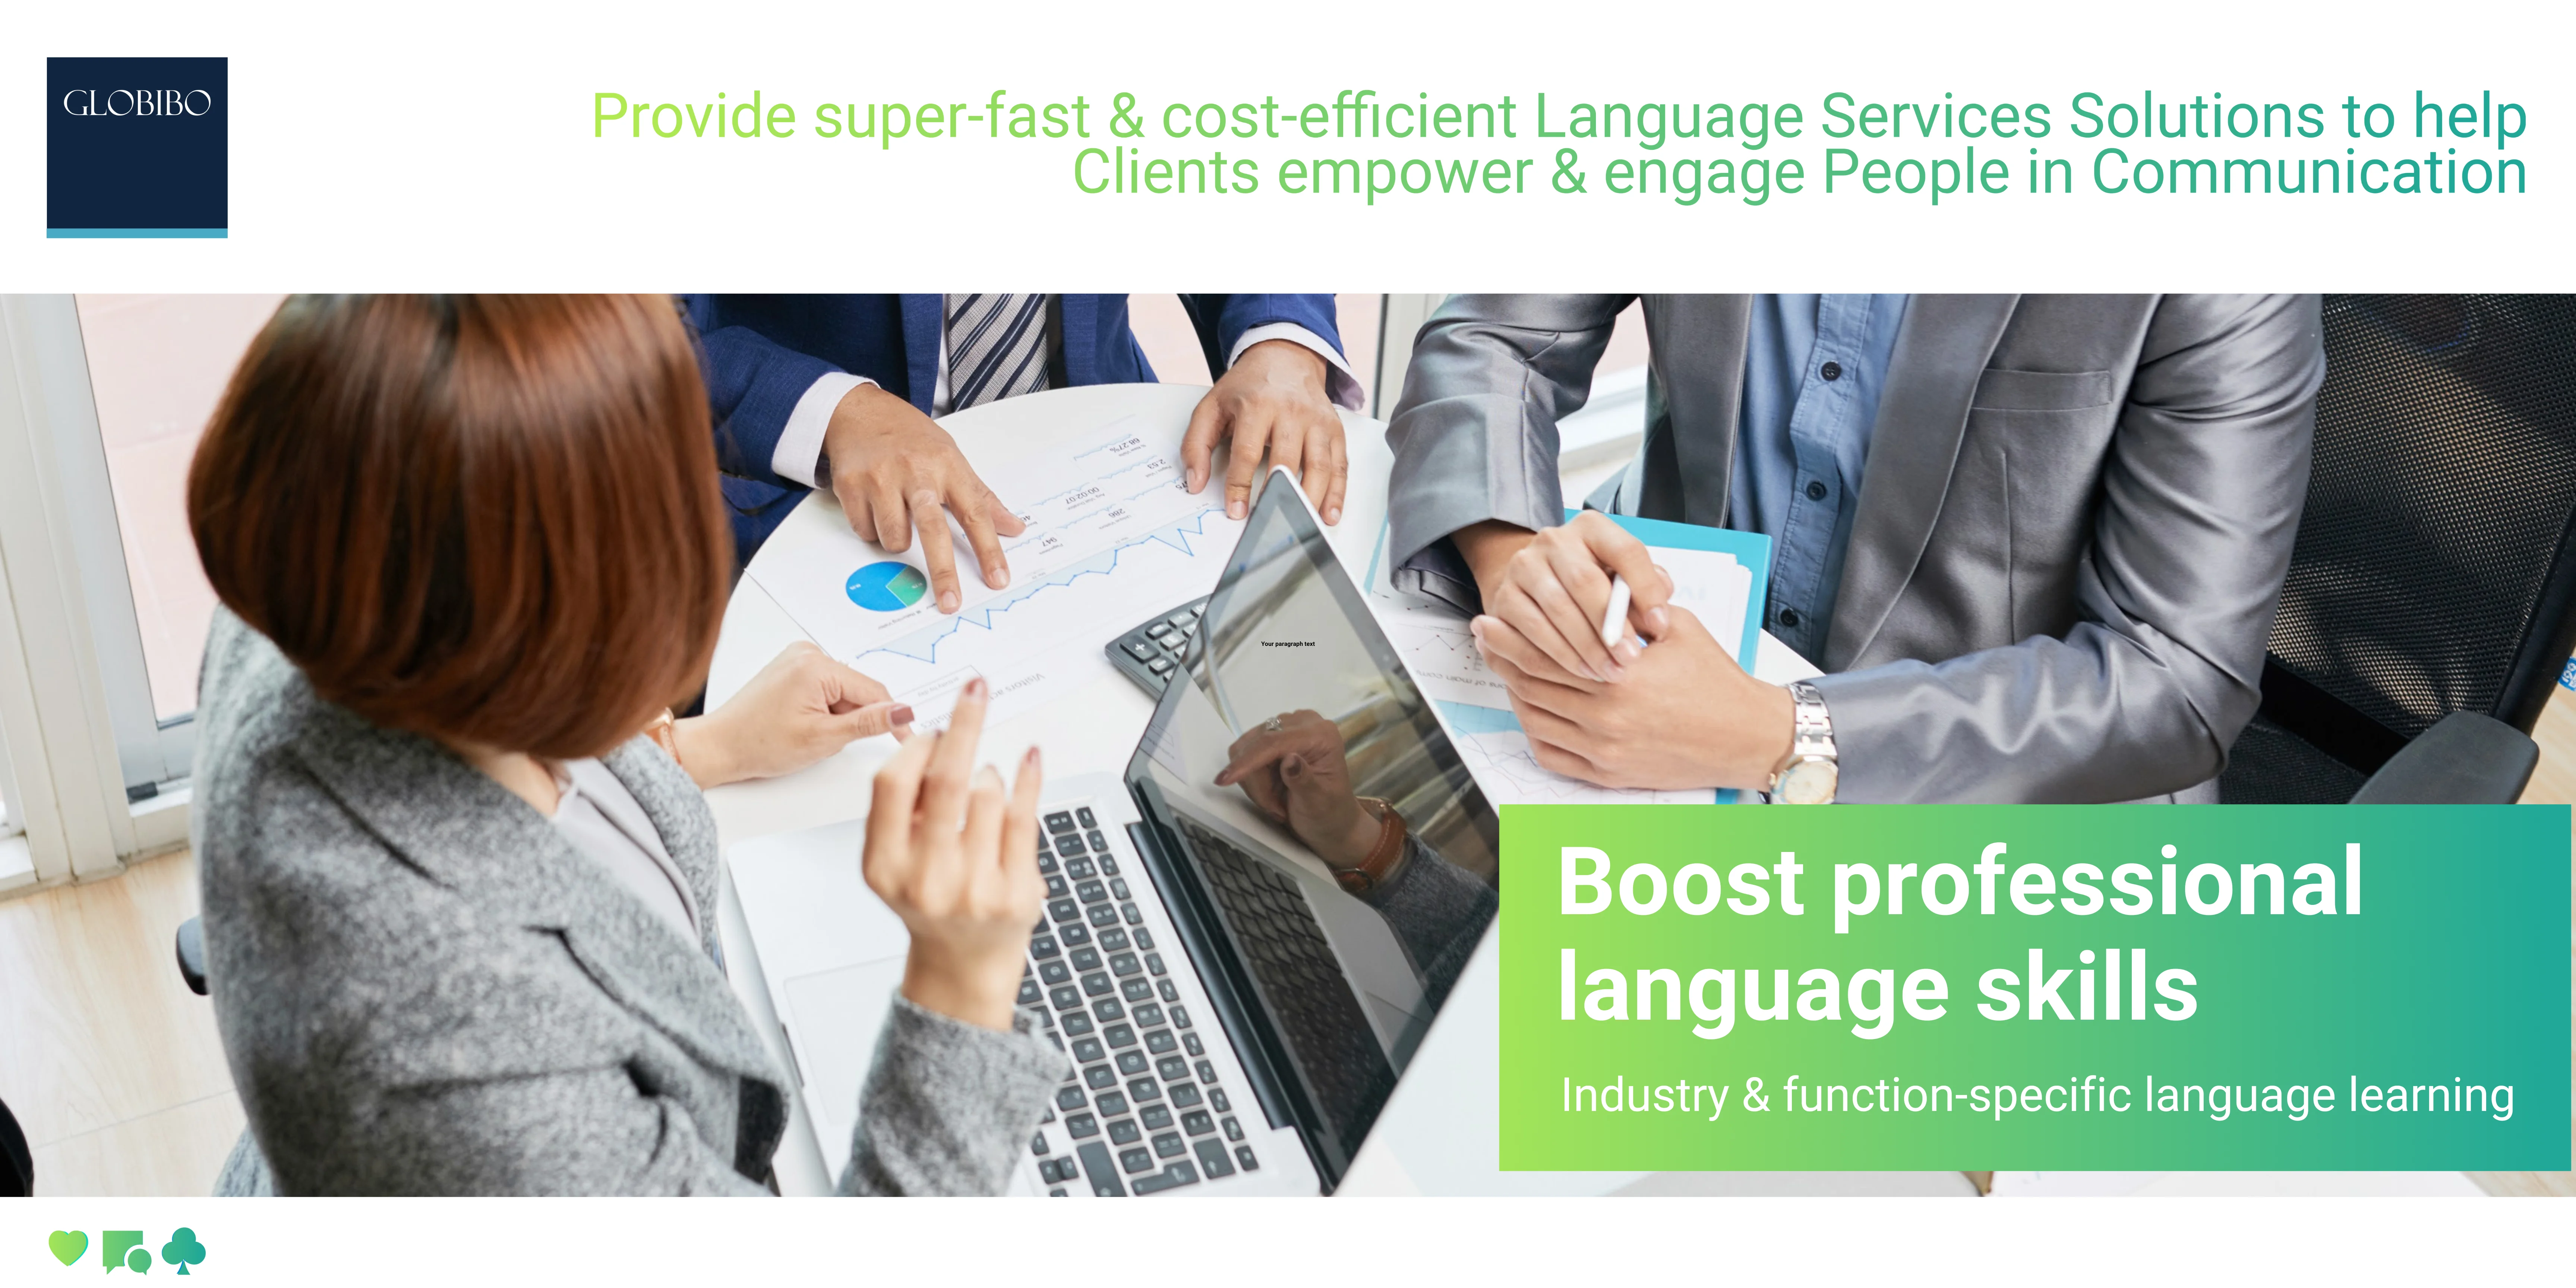 Globibo offers industry & function-specific language learning program